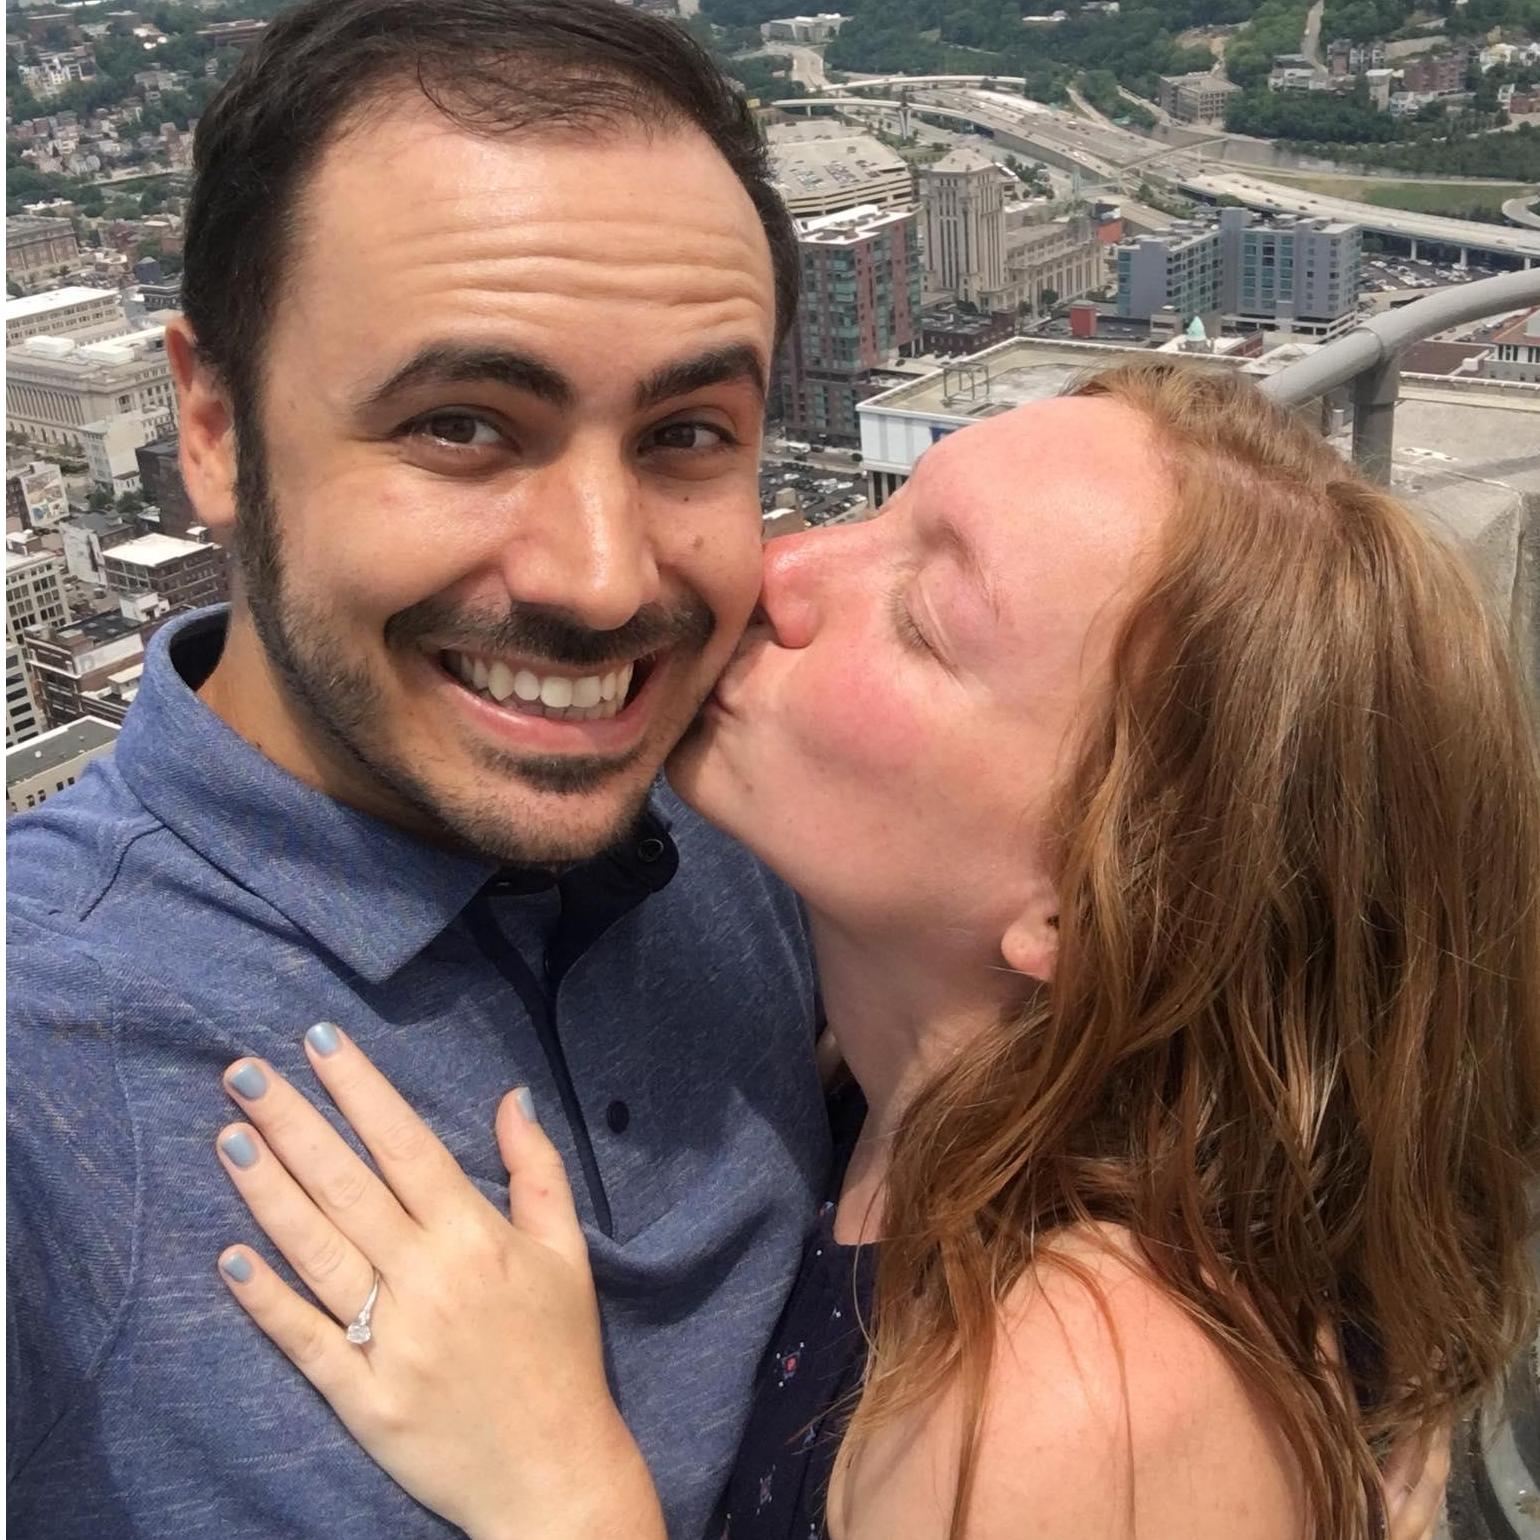 Getting engaged at Carew Tower